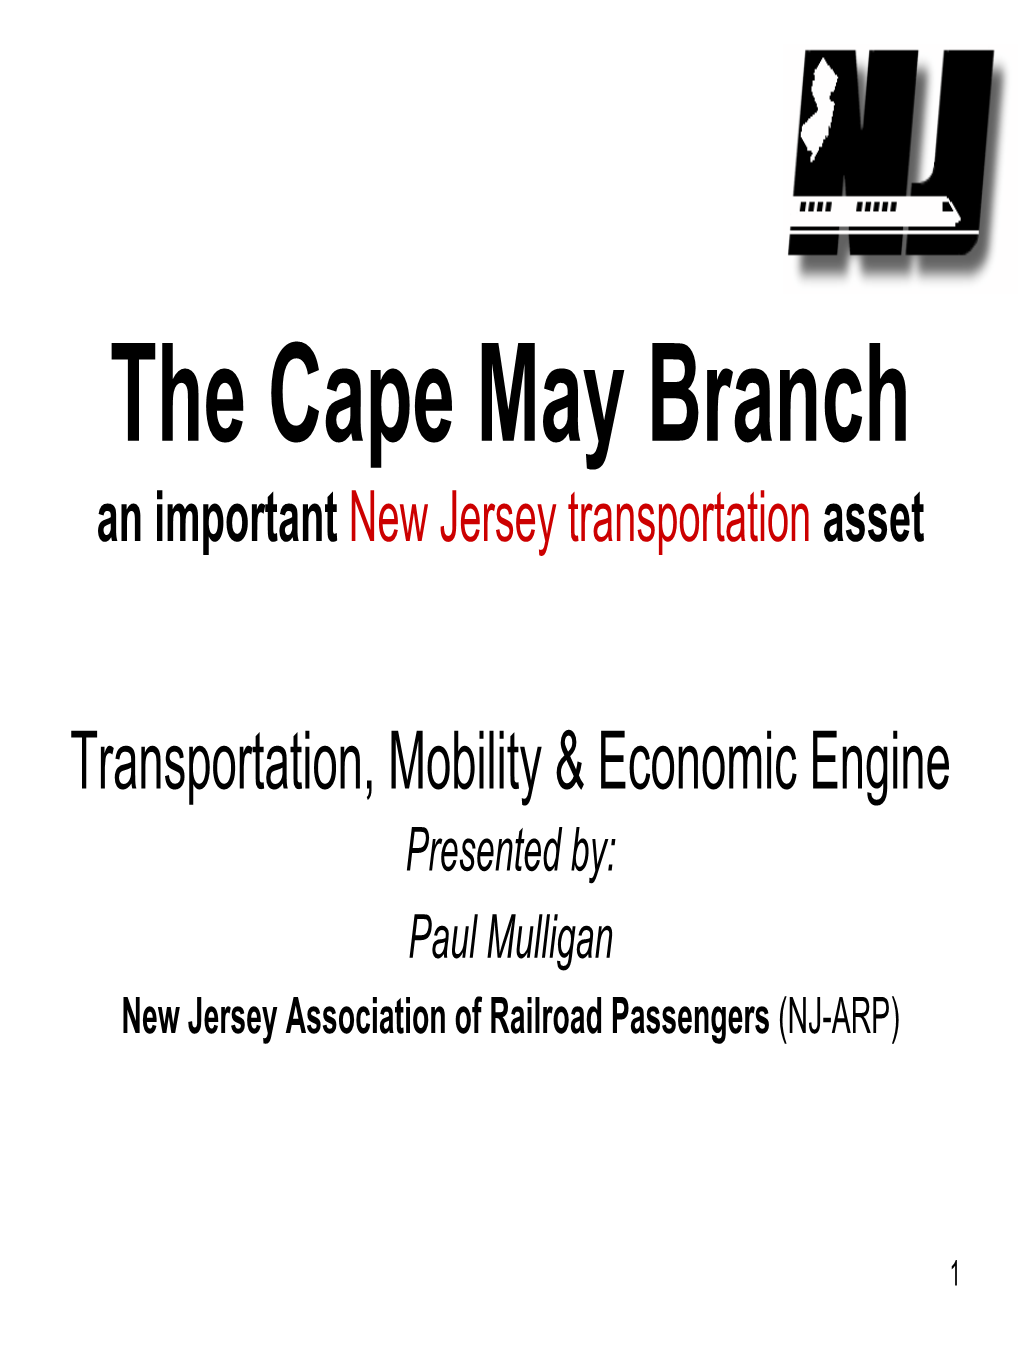 The Cape May Branch an Important New Jersey Transportation Asset